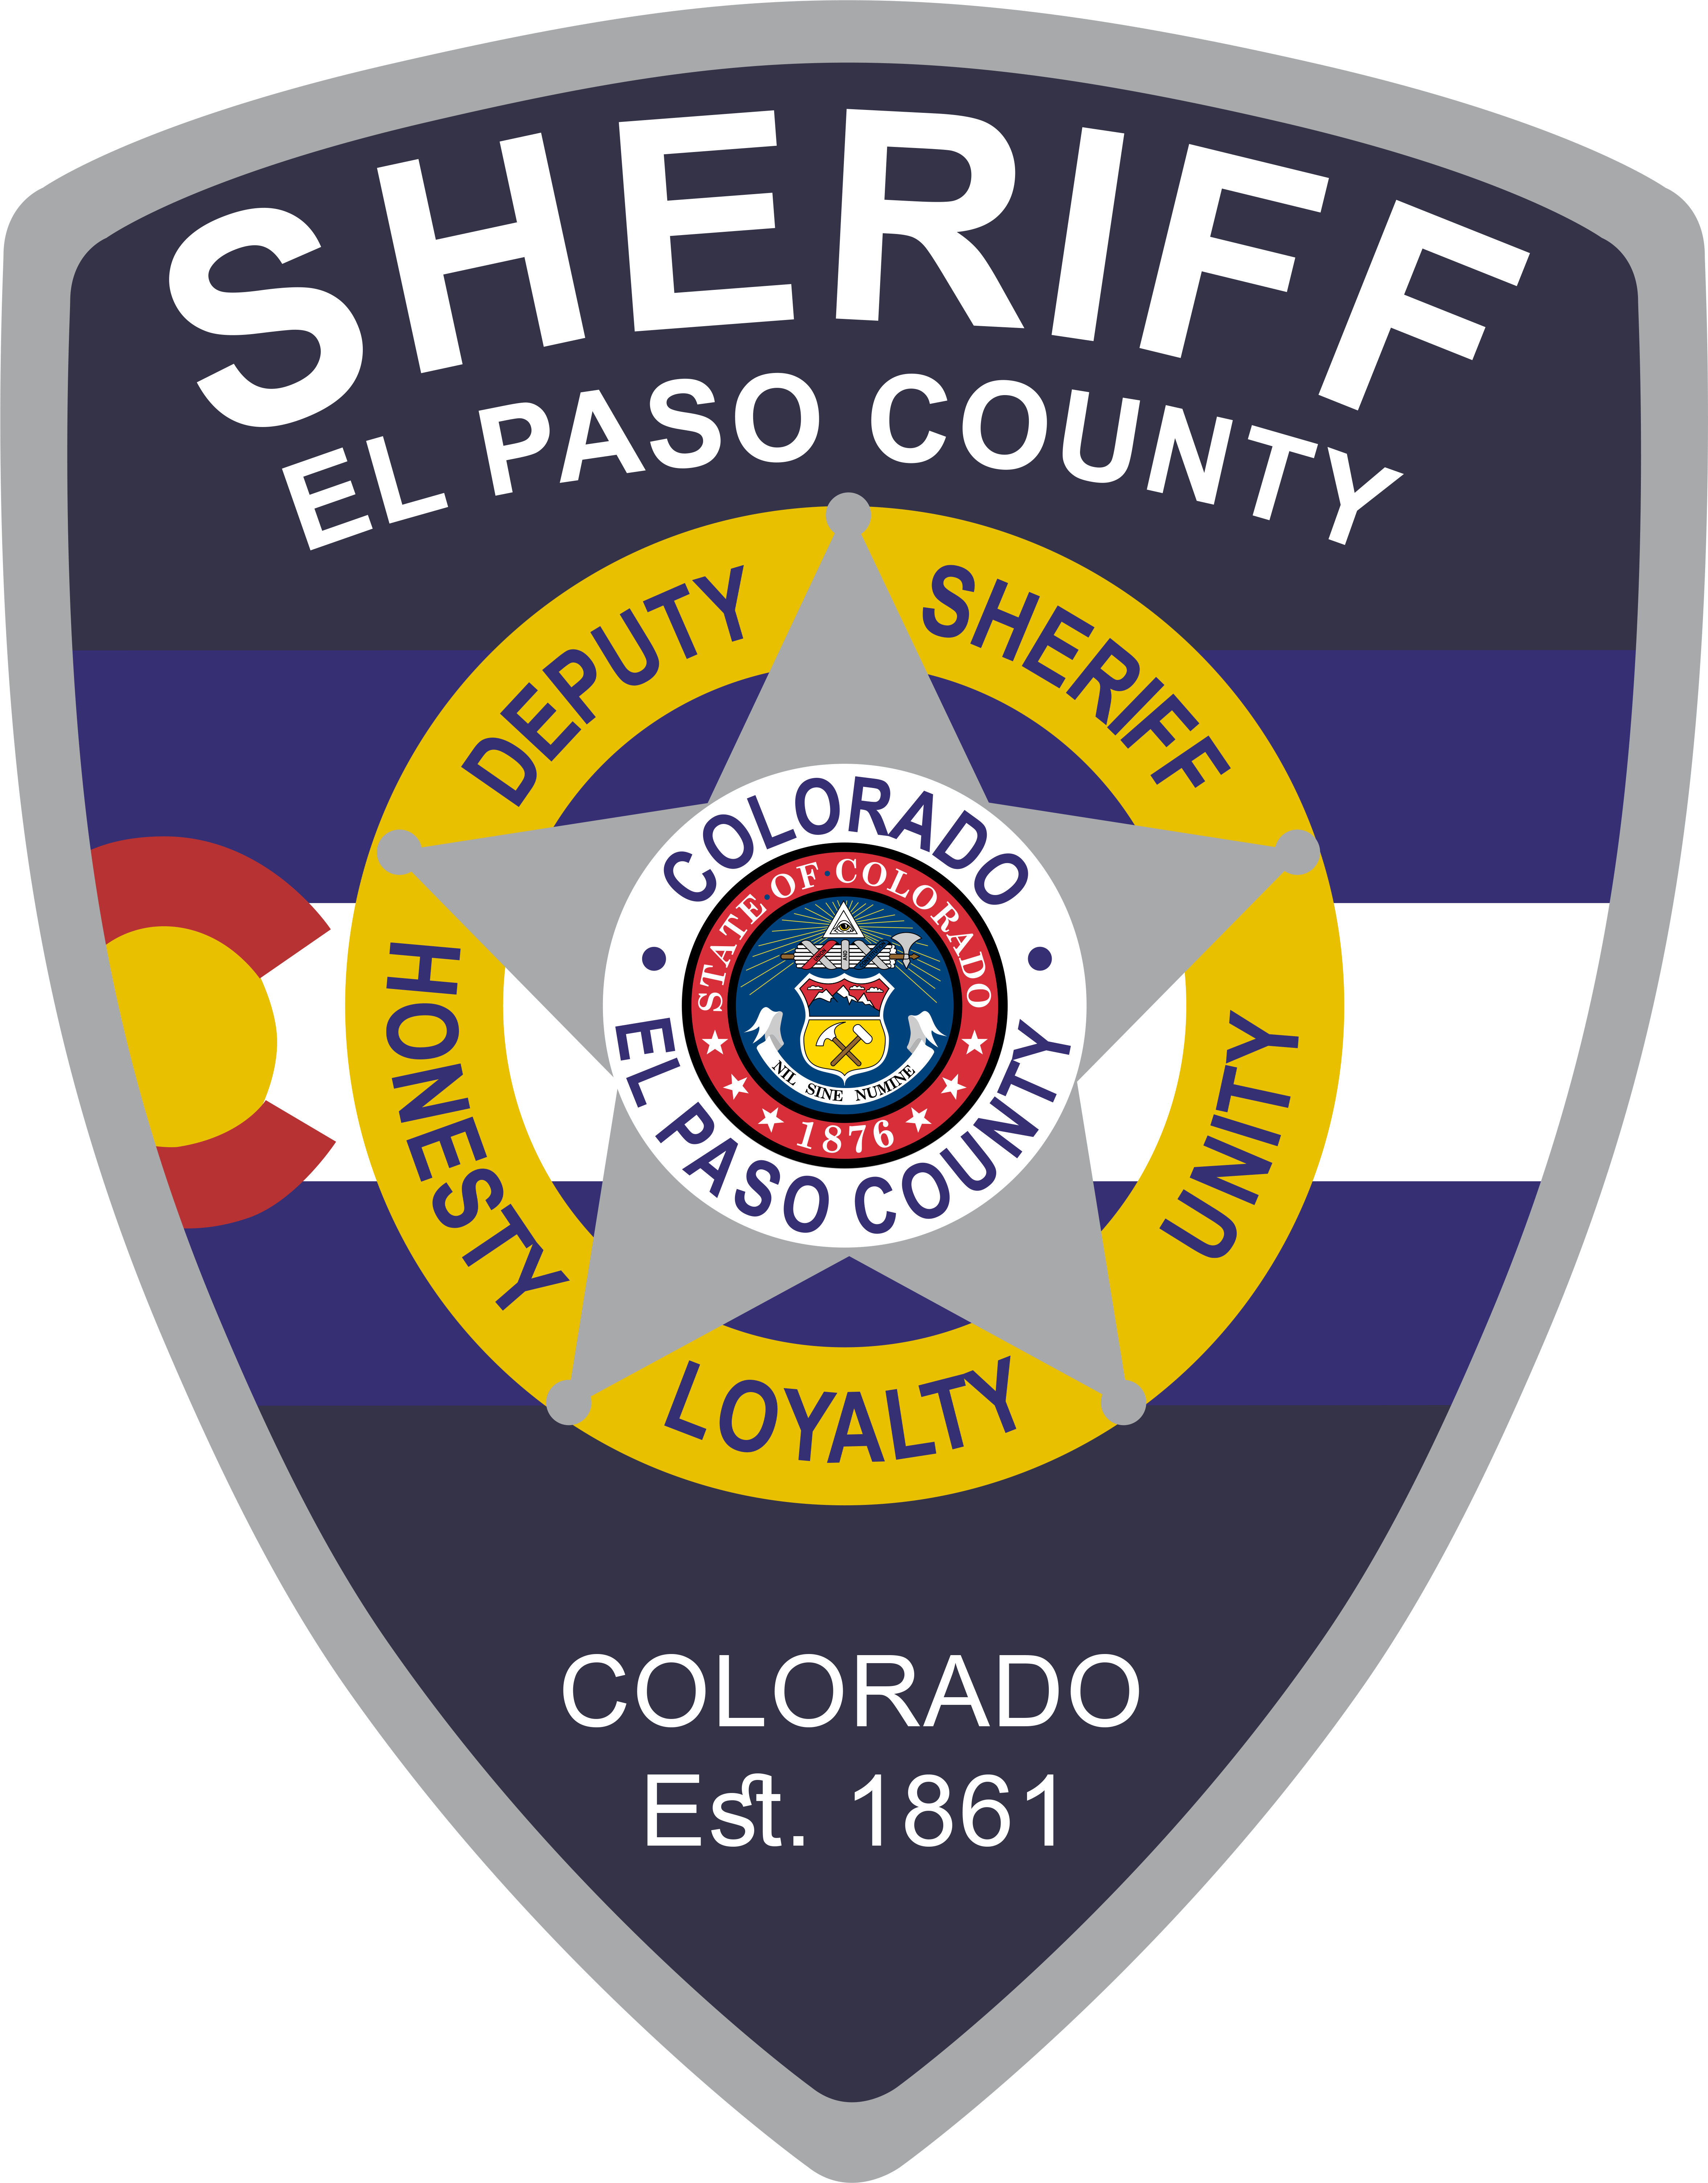 El Paso County Sheriff’s Office Signs Three-Year Agreement with Miller Mendel, Inc.